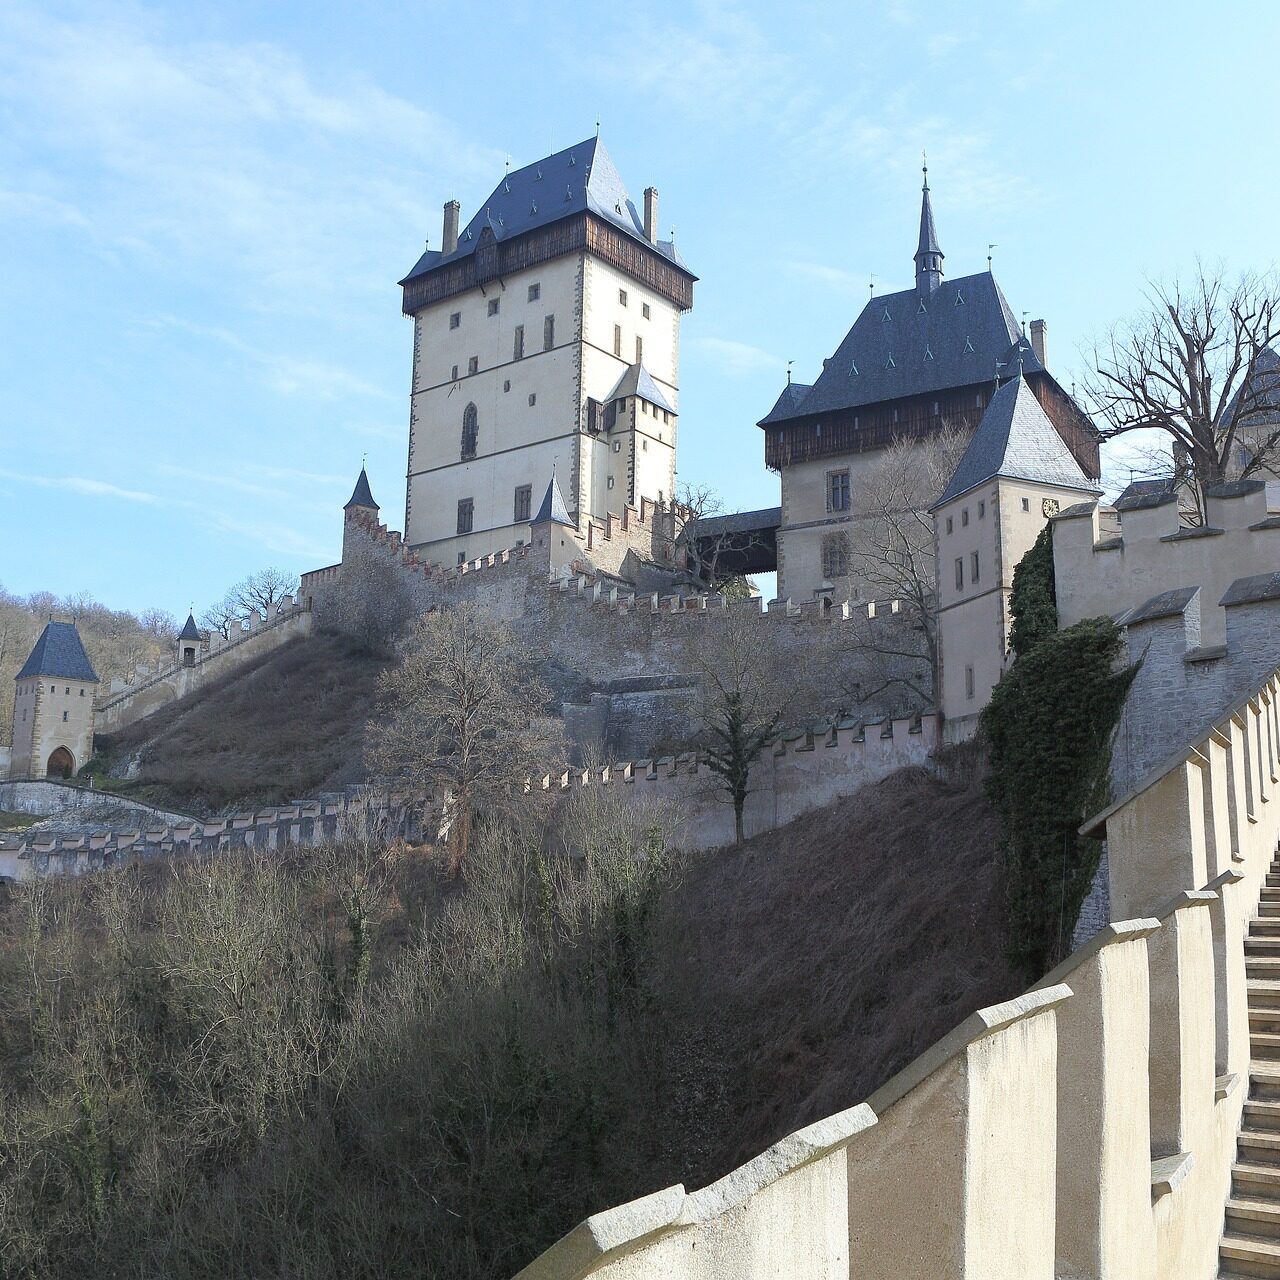 A view of the walk up to Karlštejn Castle in Bohemia.